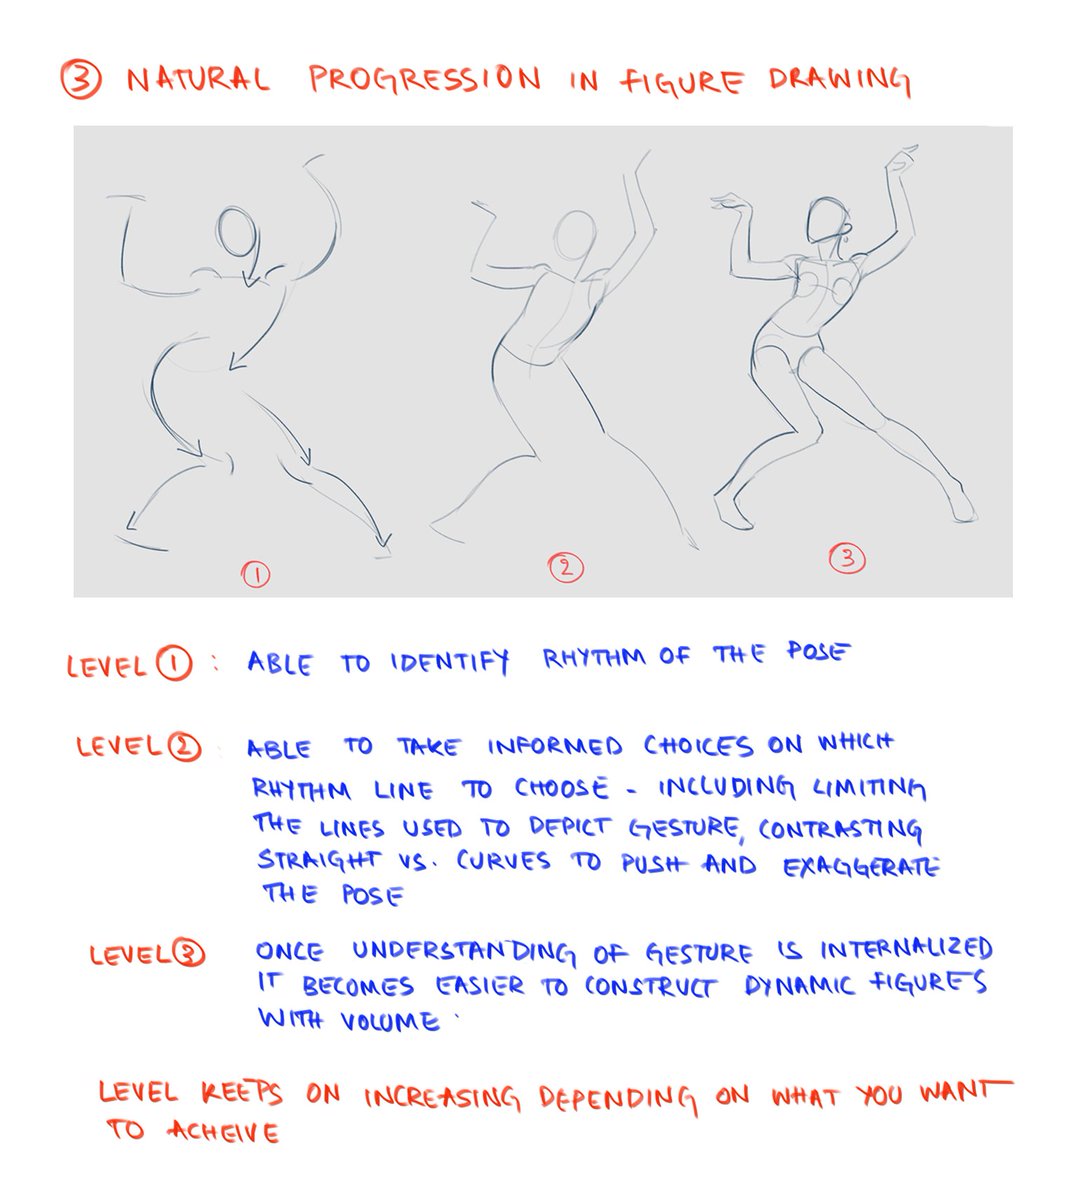 made a few gesture drawing tips for someone just 
starting out in figure drawing. mostly consists of what to notice to have a better understanding of the process

#tips #figuredrawing